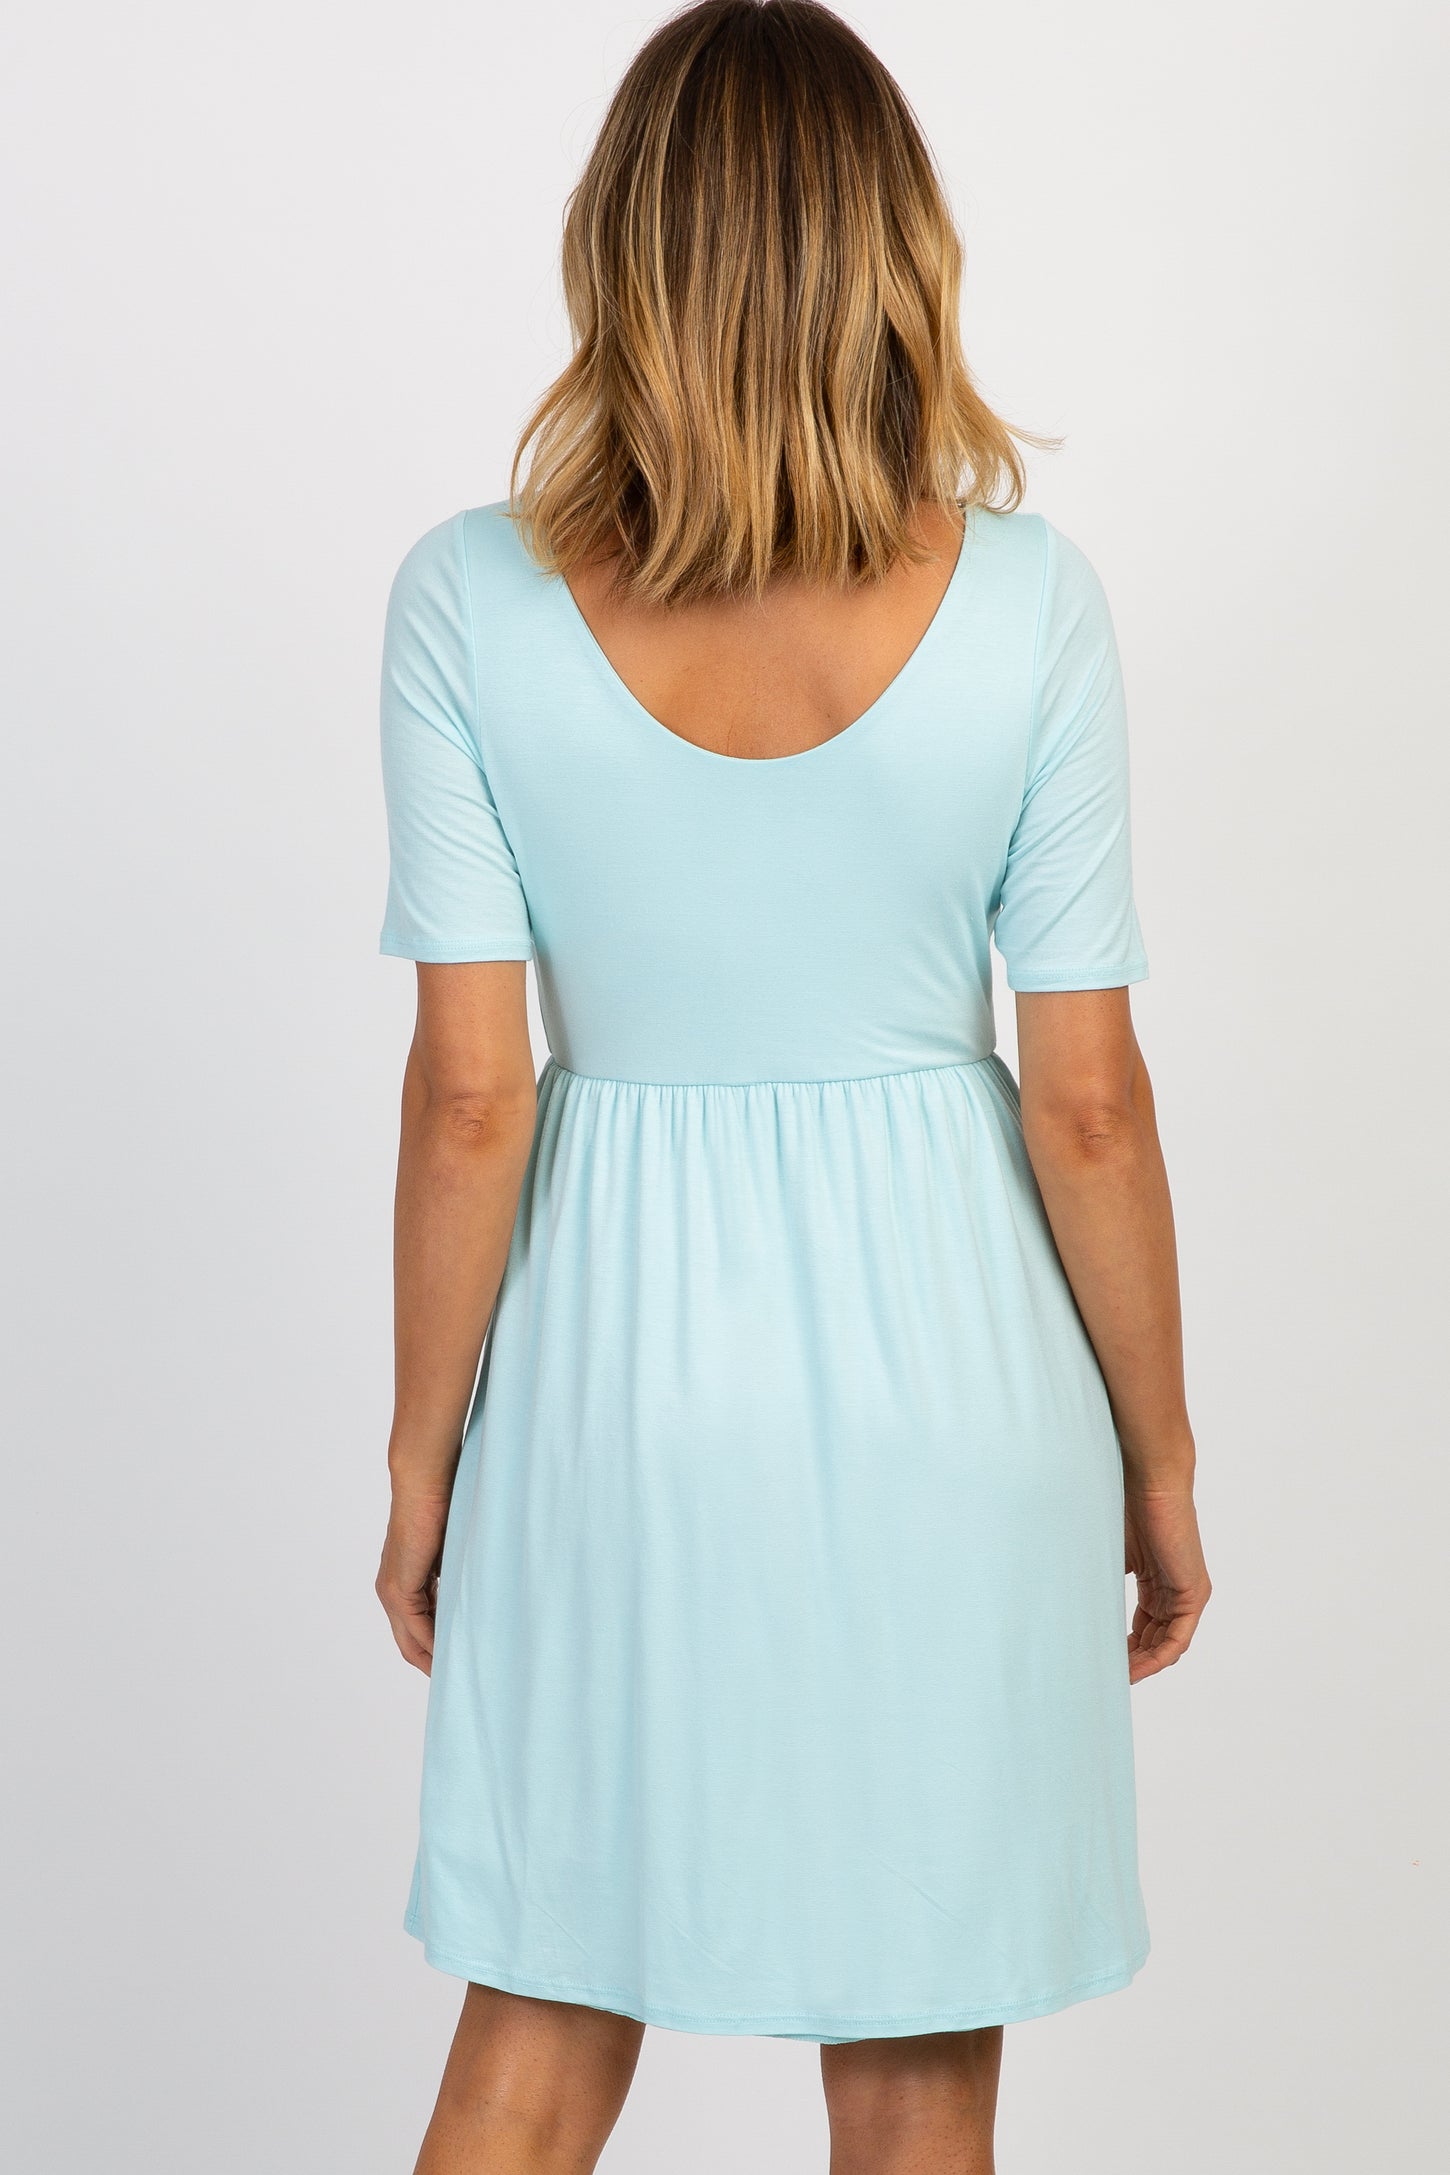 PinkBlush Mint Green Solid Button Front Dress